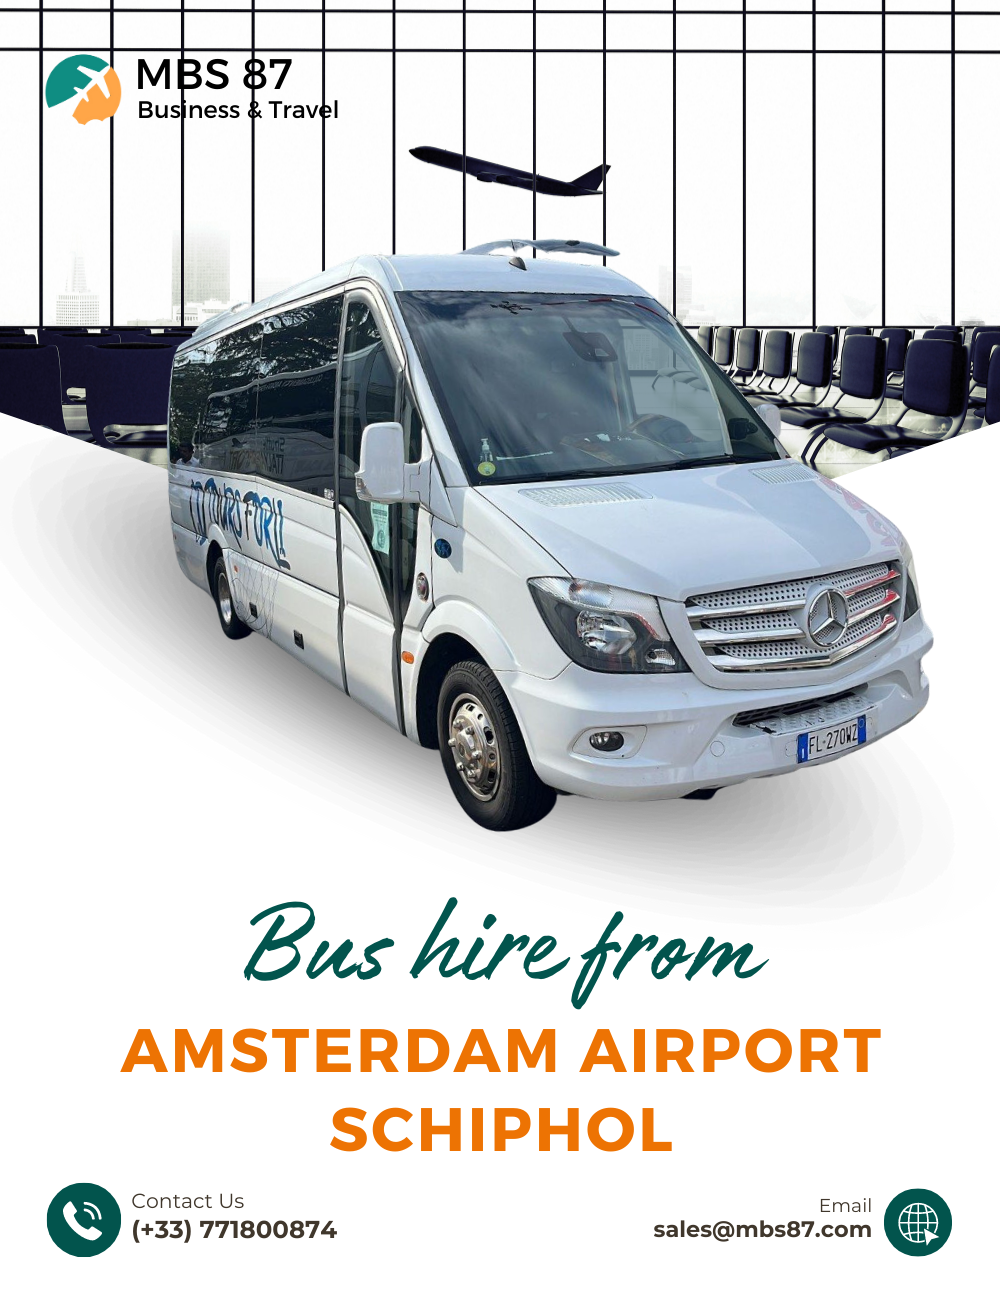 How to Choose the Best Airport Transfer Service in Amsterdam